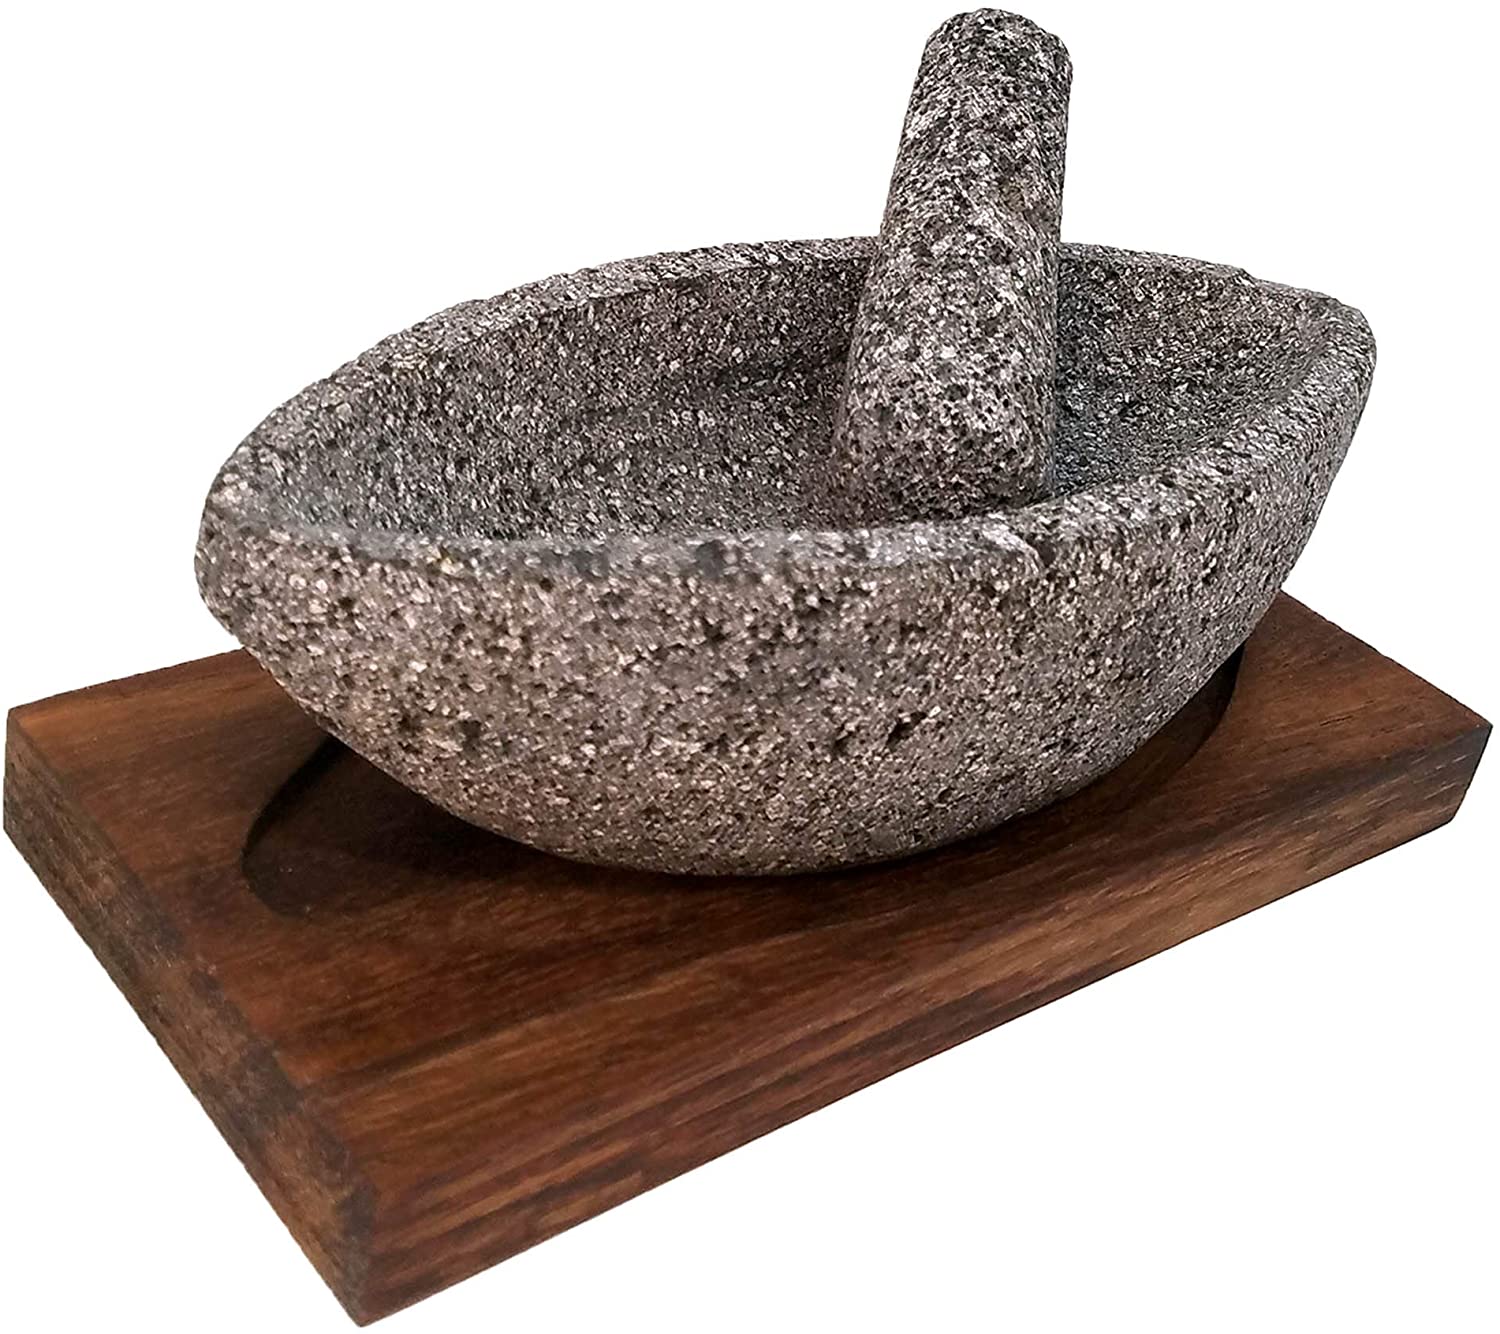  / Canoe Shaped Mortar and Pestle Set with Parota Wood Serving Board